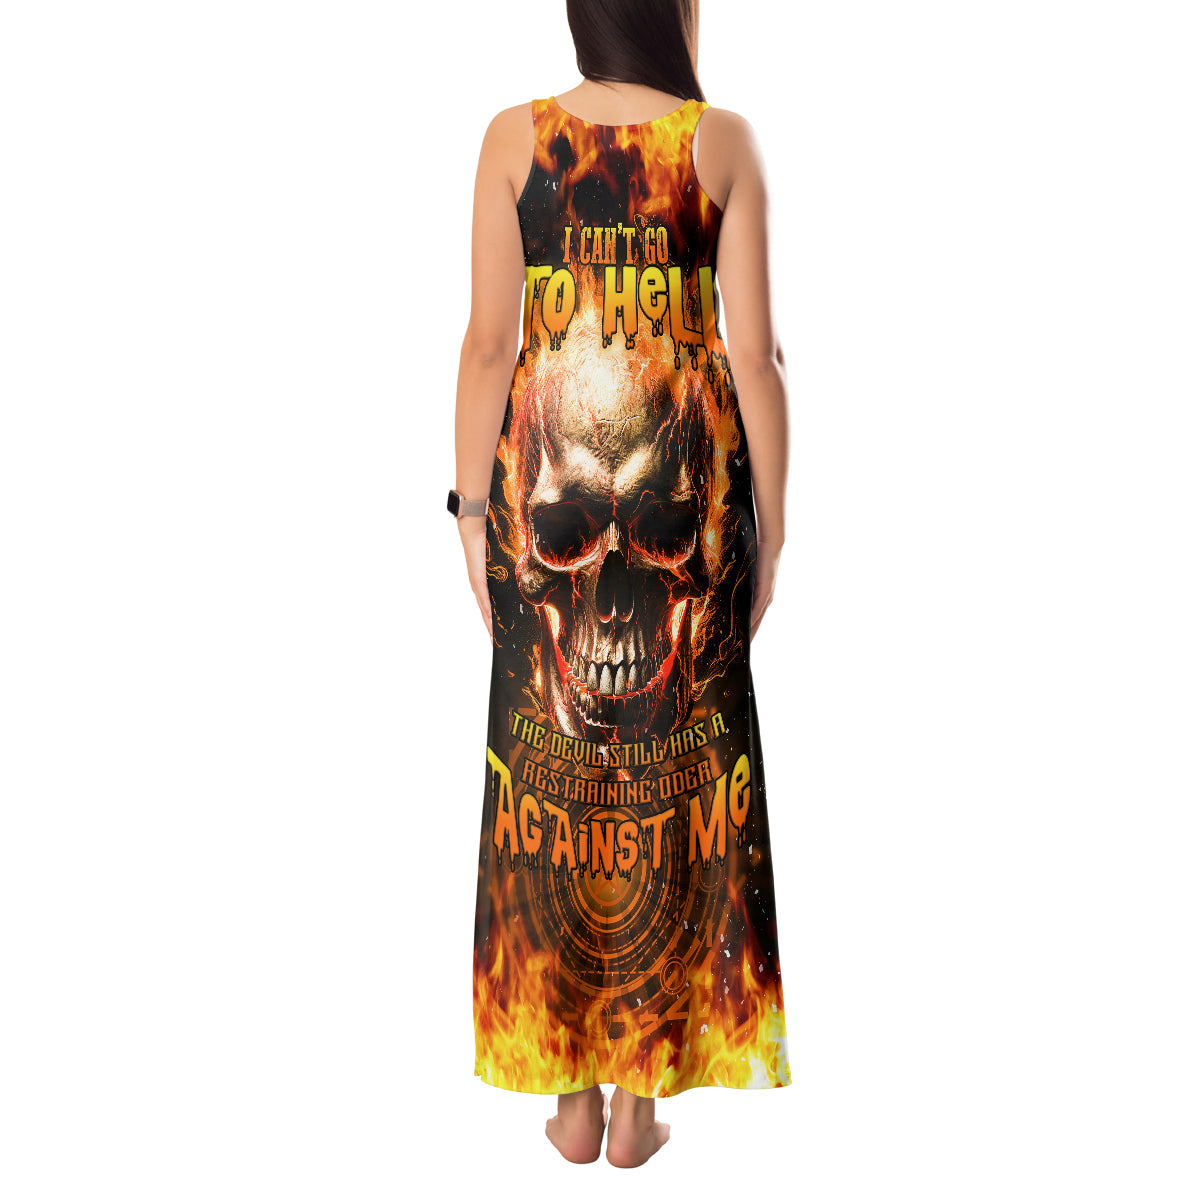 magic-fire-skull-tank-maxi-dress-i-cant-go-to-hell-the-devil-still-has-a-rest-training-oder-against-me